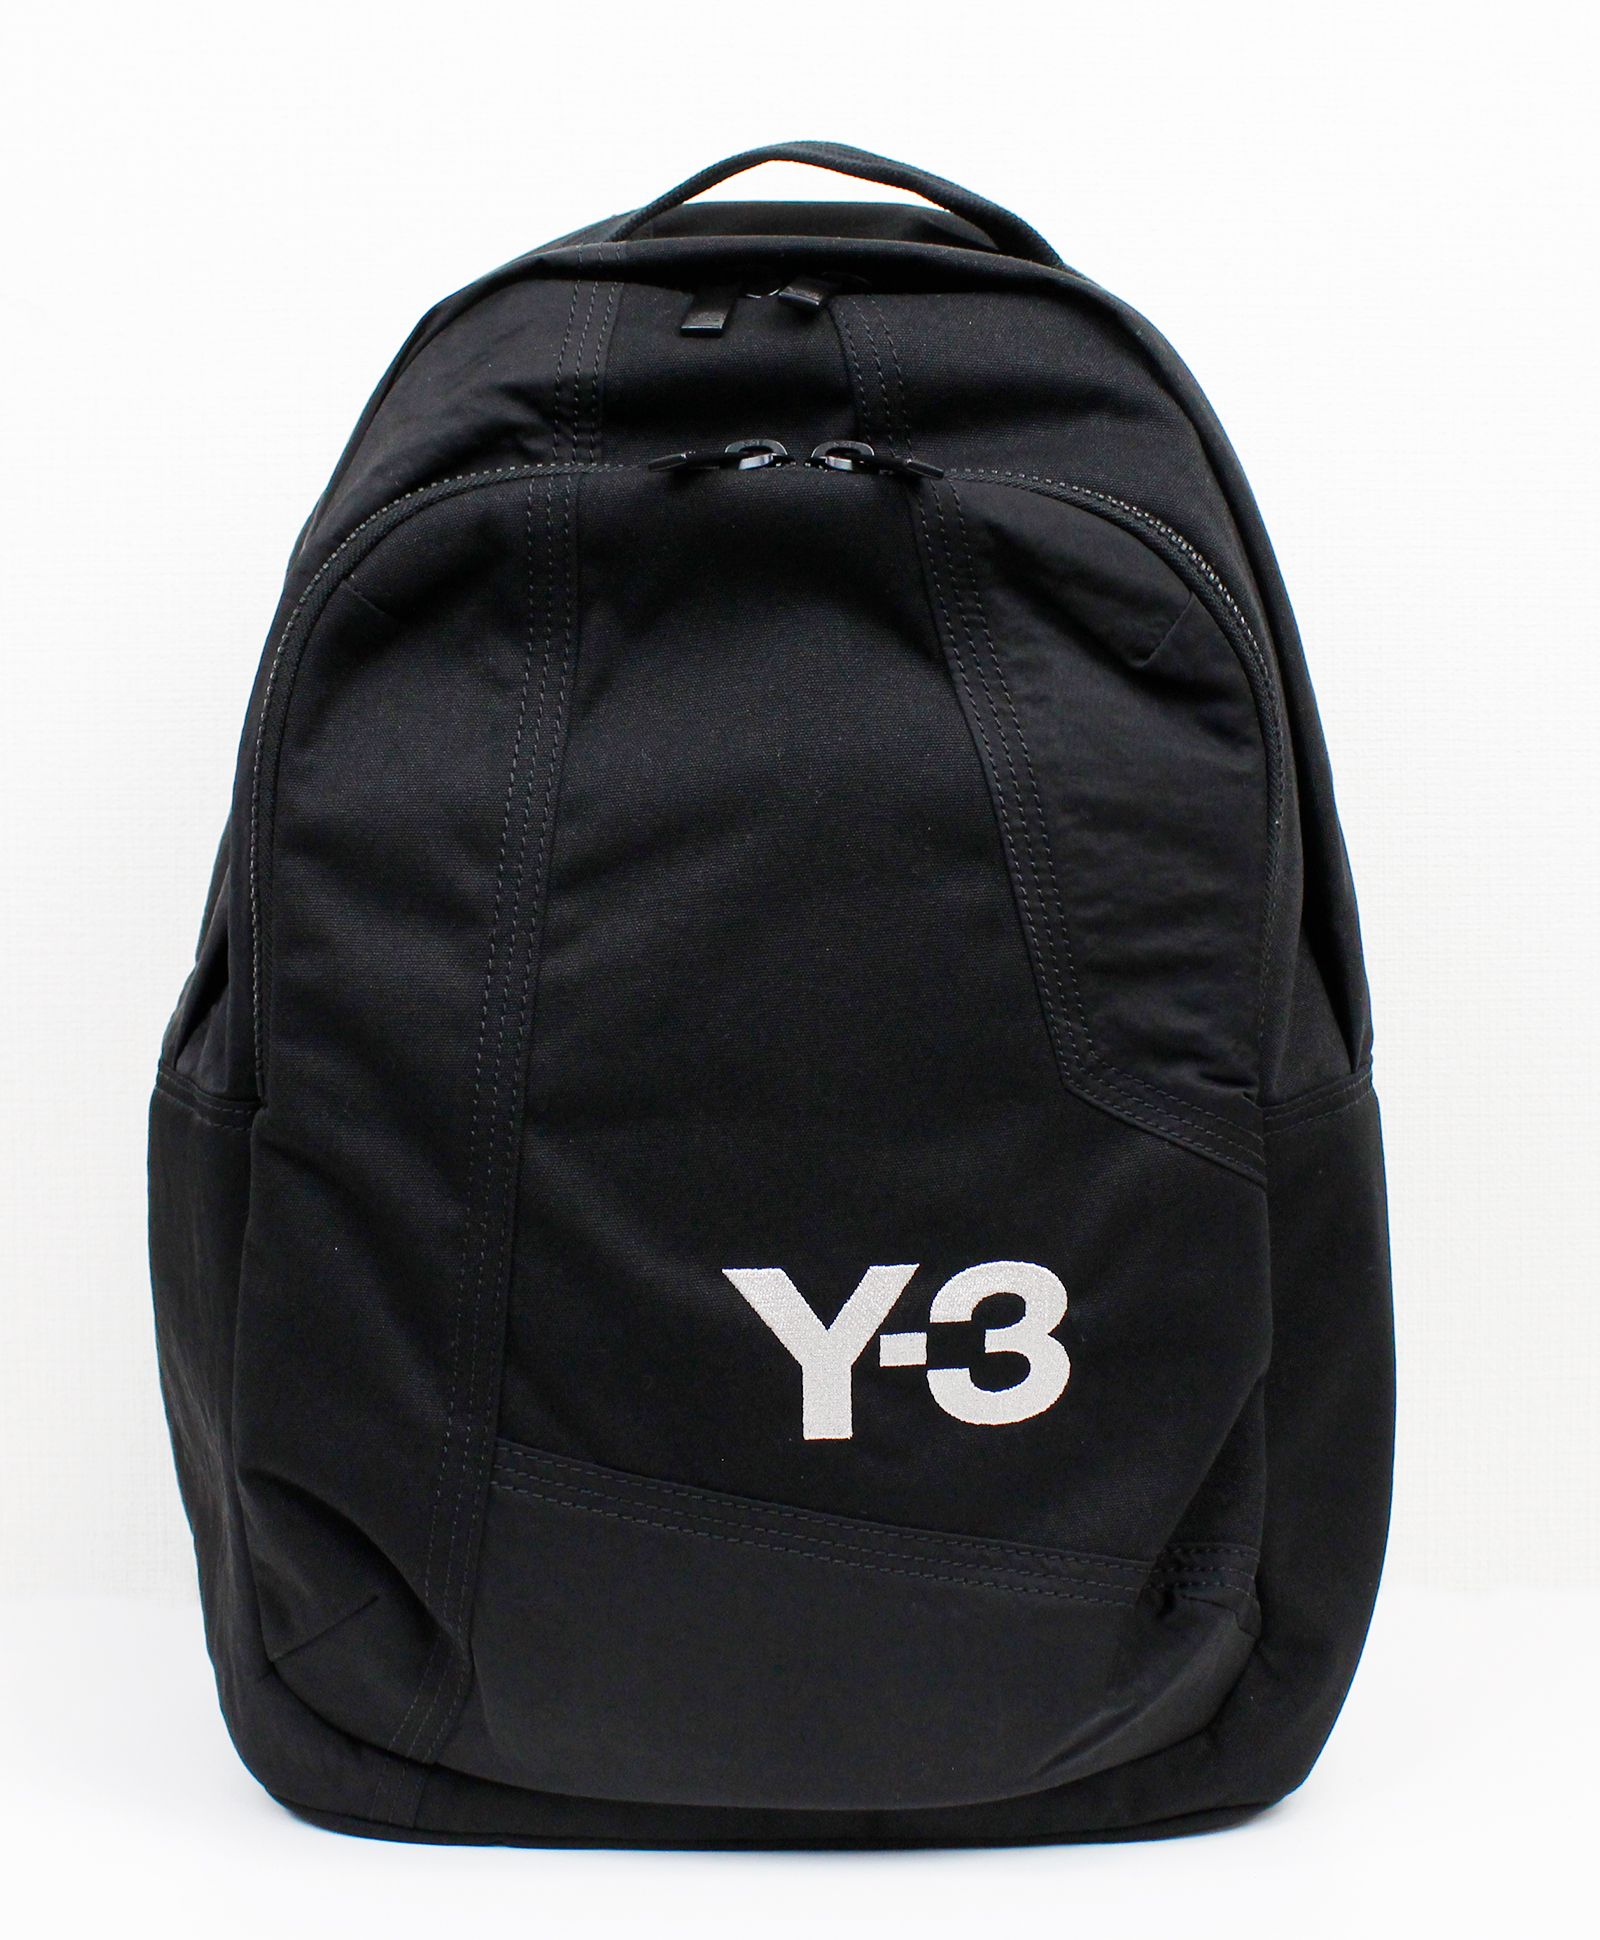 Y-3 - バックパック / リュック / CLASSIC BACKPACK [H63097-ACCS23 